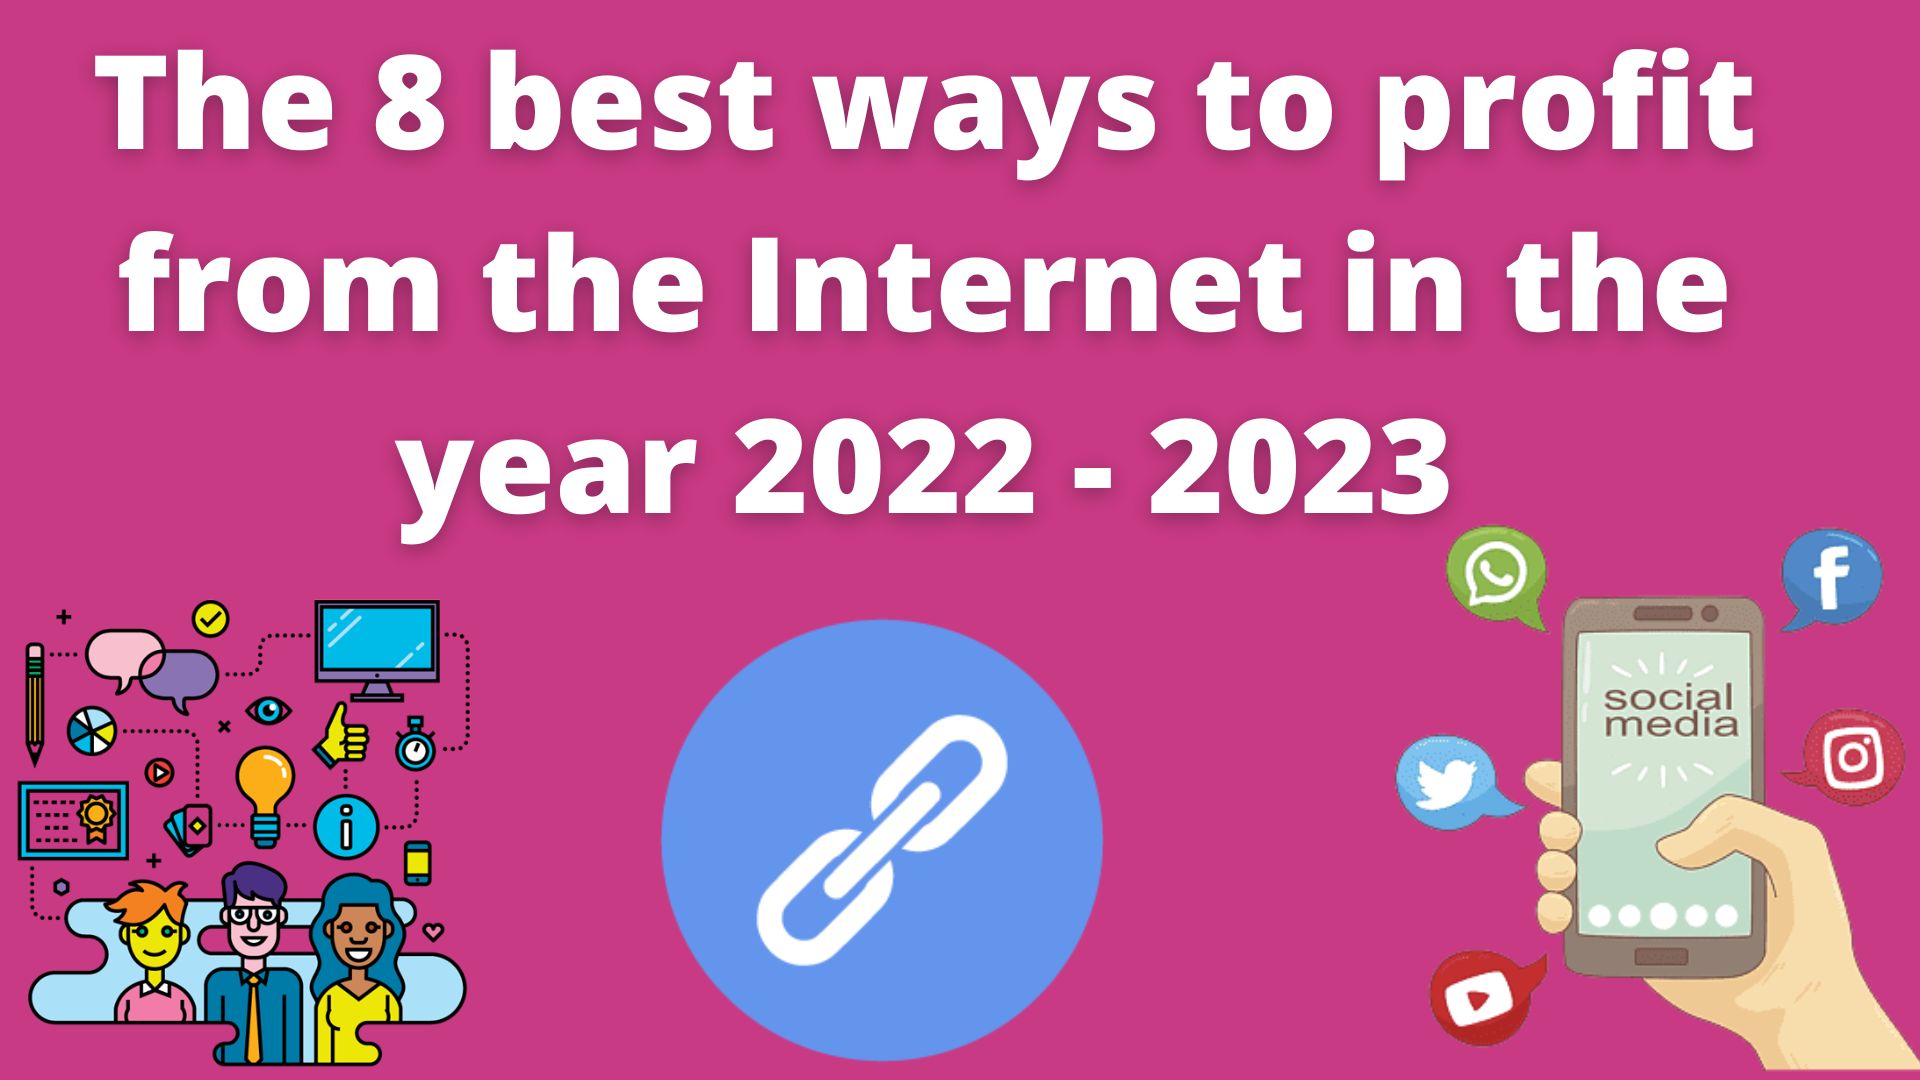 The 8 Best Ways To Profit From The Internet In The Year 2022 - 2023